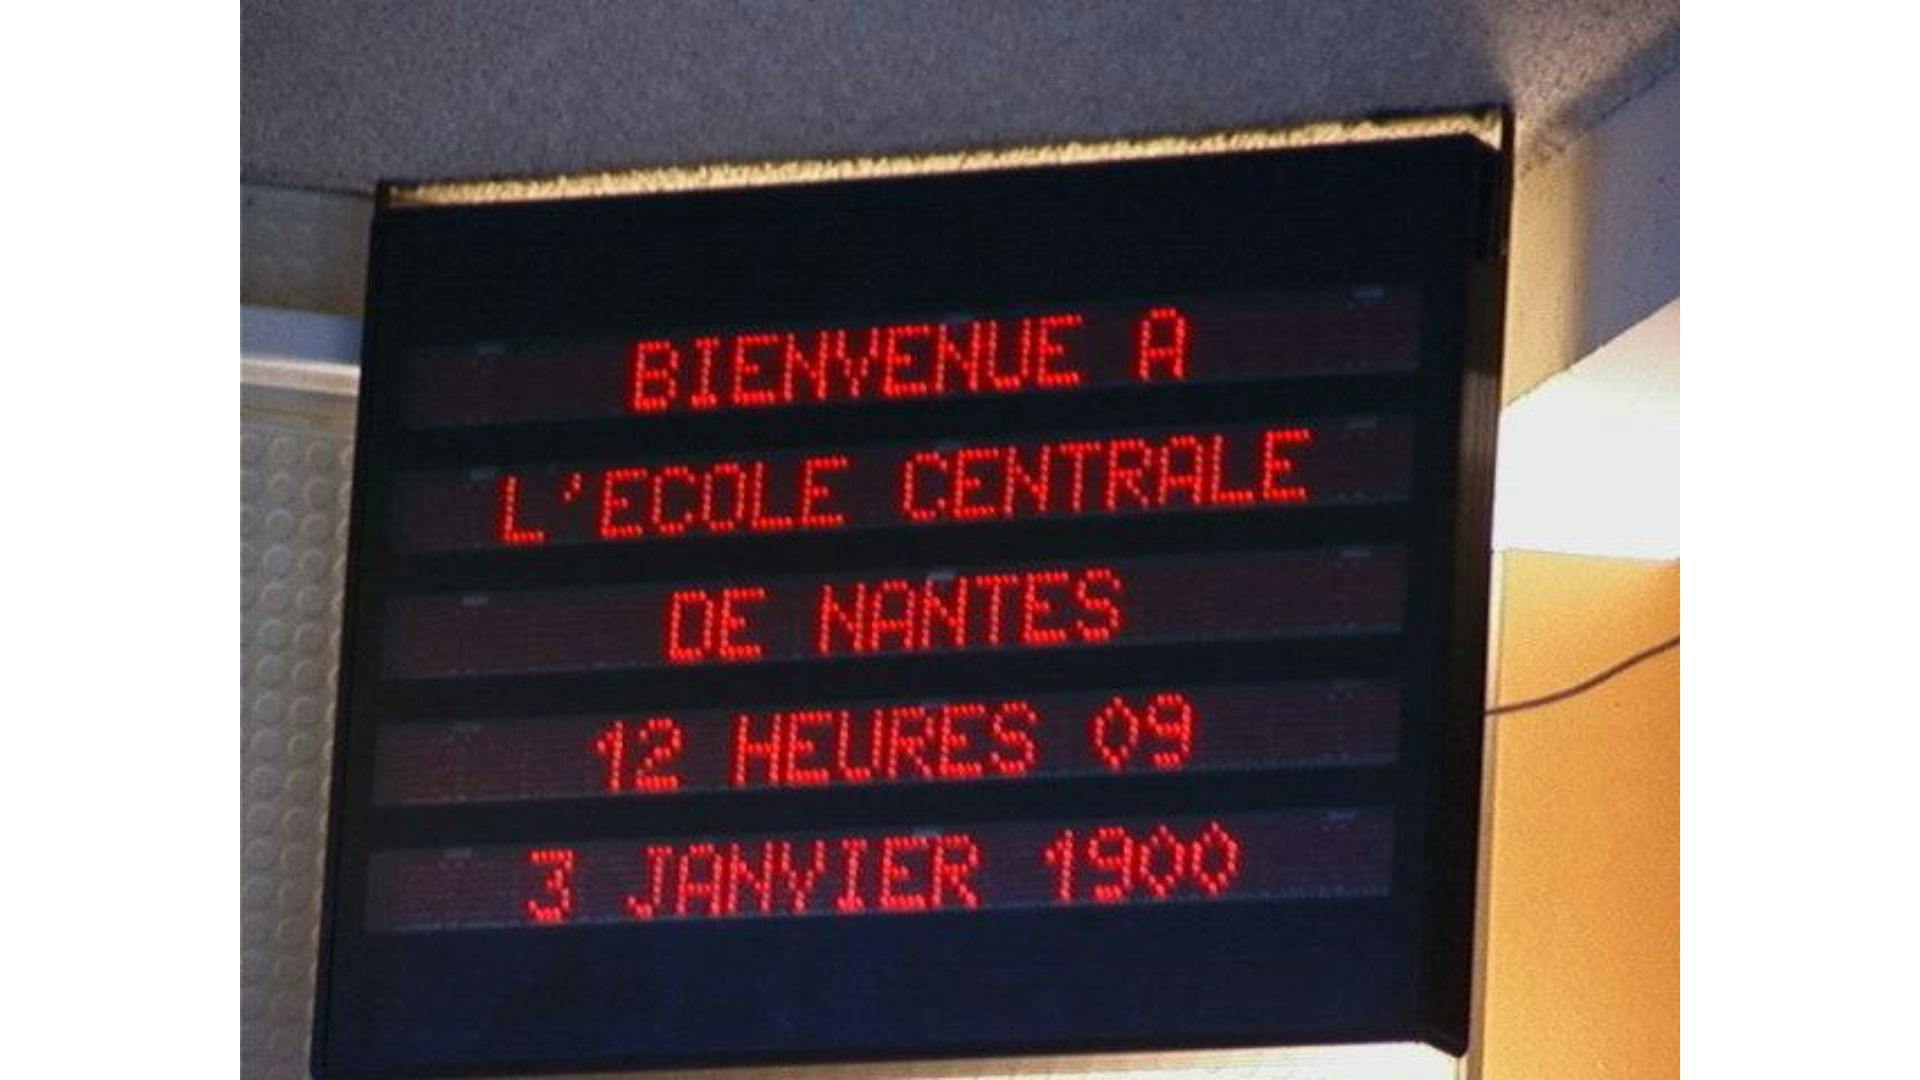 An electronic sign at École centrale de Nantes incorrectly displaying the year 1900 on 3 January 2000 | Wikimedia Commons